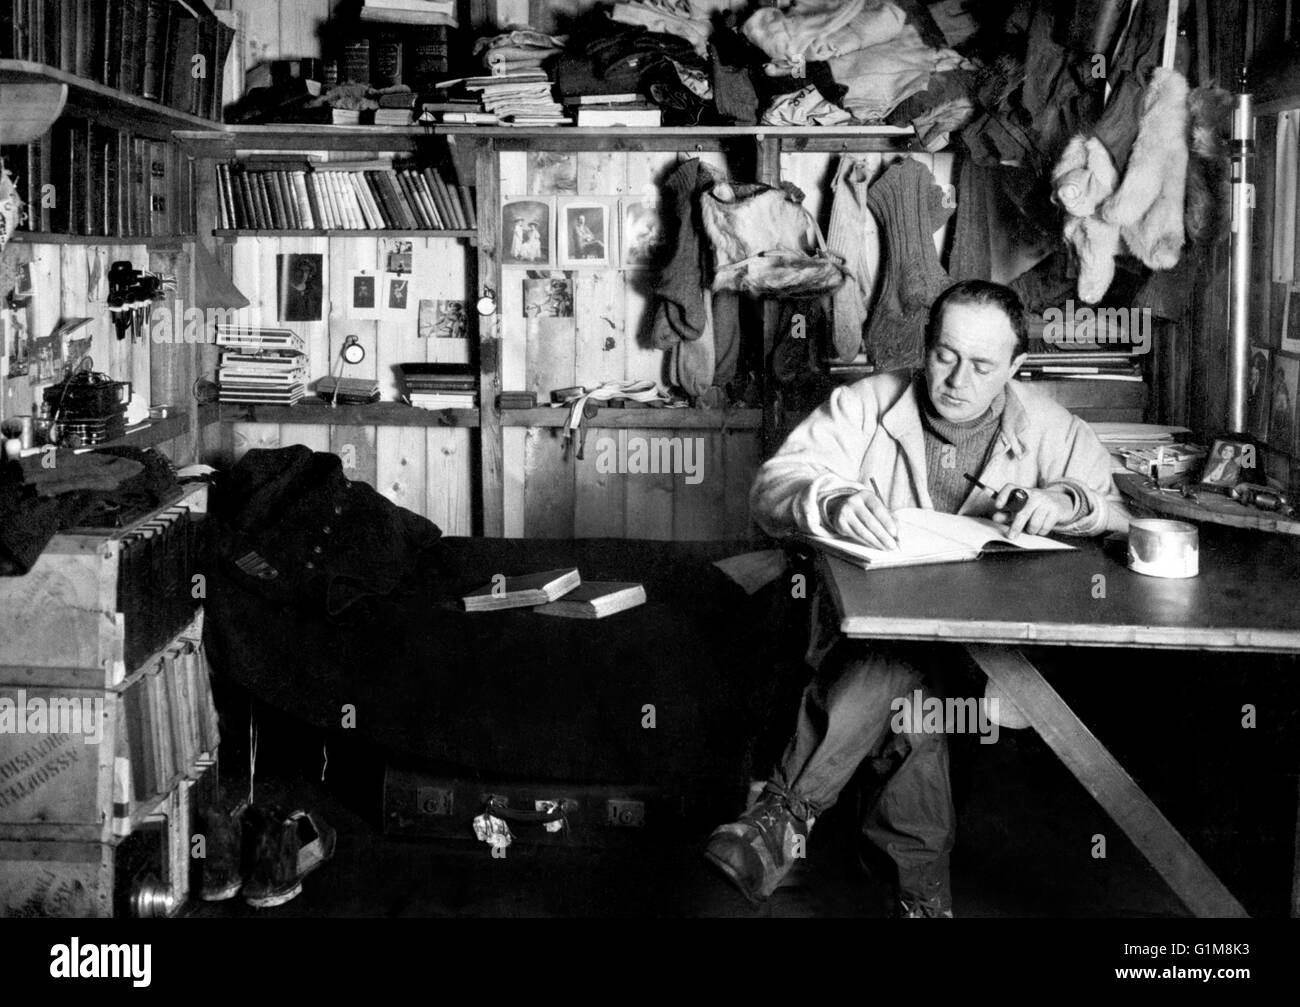 Captain Robert Falcon Scott writing at a table in his quarters (known as his 'den') at the British base camp in Antarctica. Scott and his party perished on the return journey after their failed attempt to be the first to reach the South Pole. ... Human Interest - Polar Exploration - Scott's Expedition to Antarctica ... 01-01-1911 ... BASE CAMP ... ANTARCTICA ... Photo credit should read: PA/Unique Reference No. 1210680 ... Stock Photo